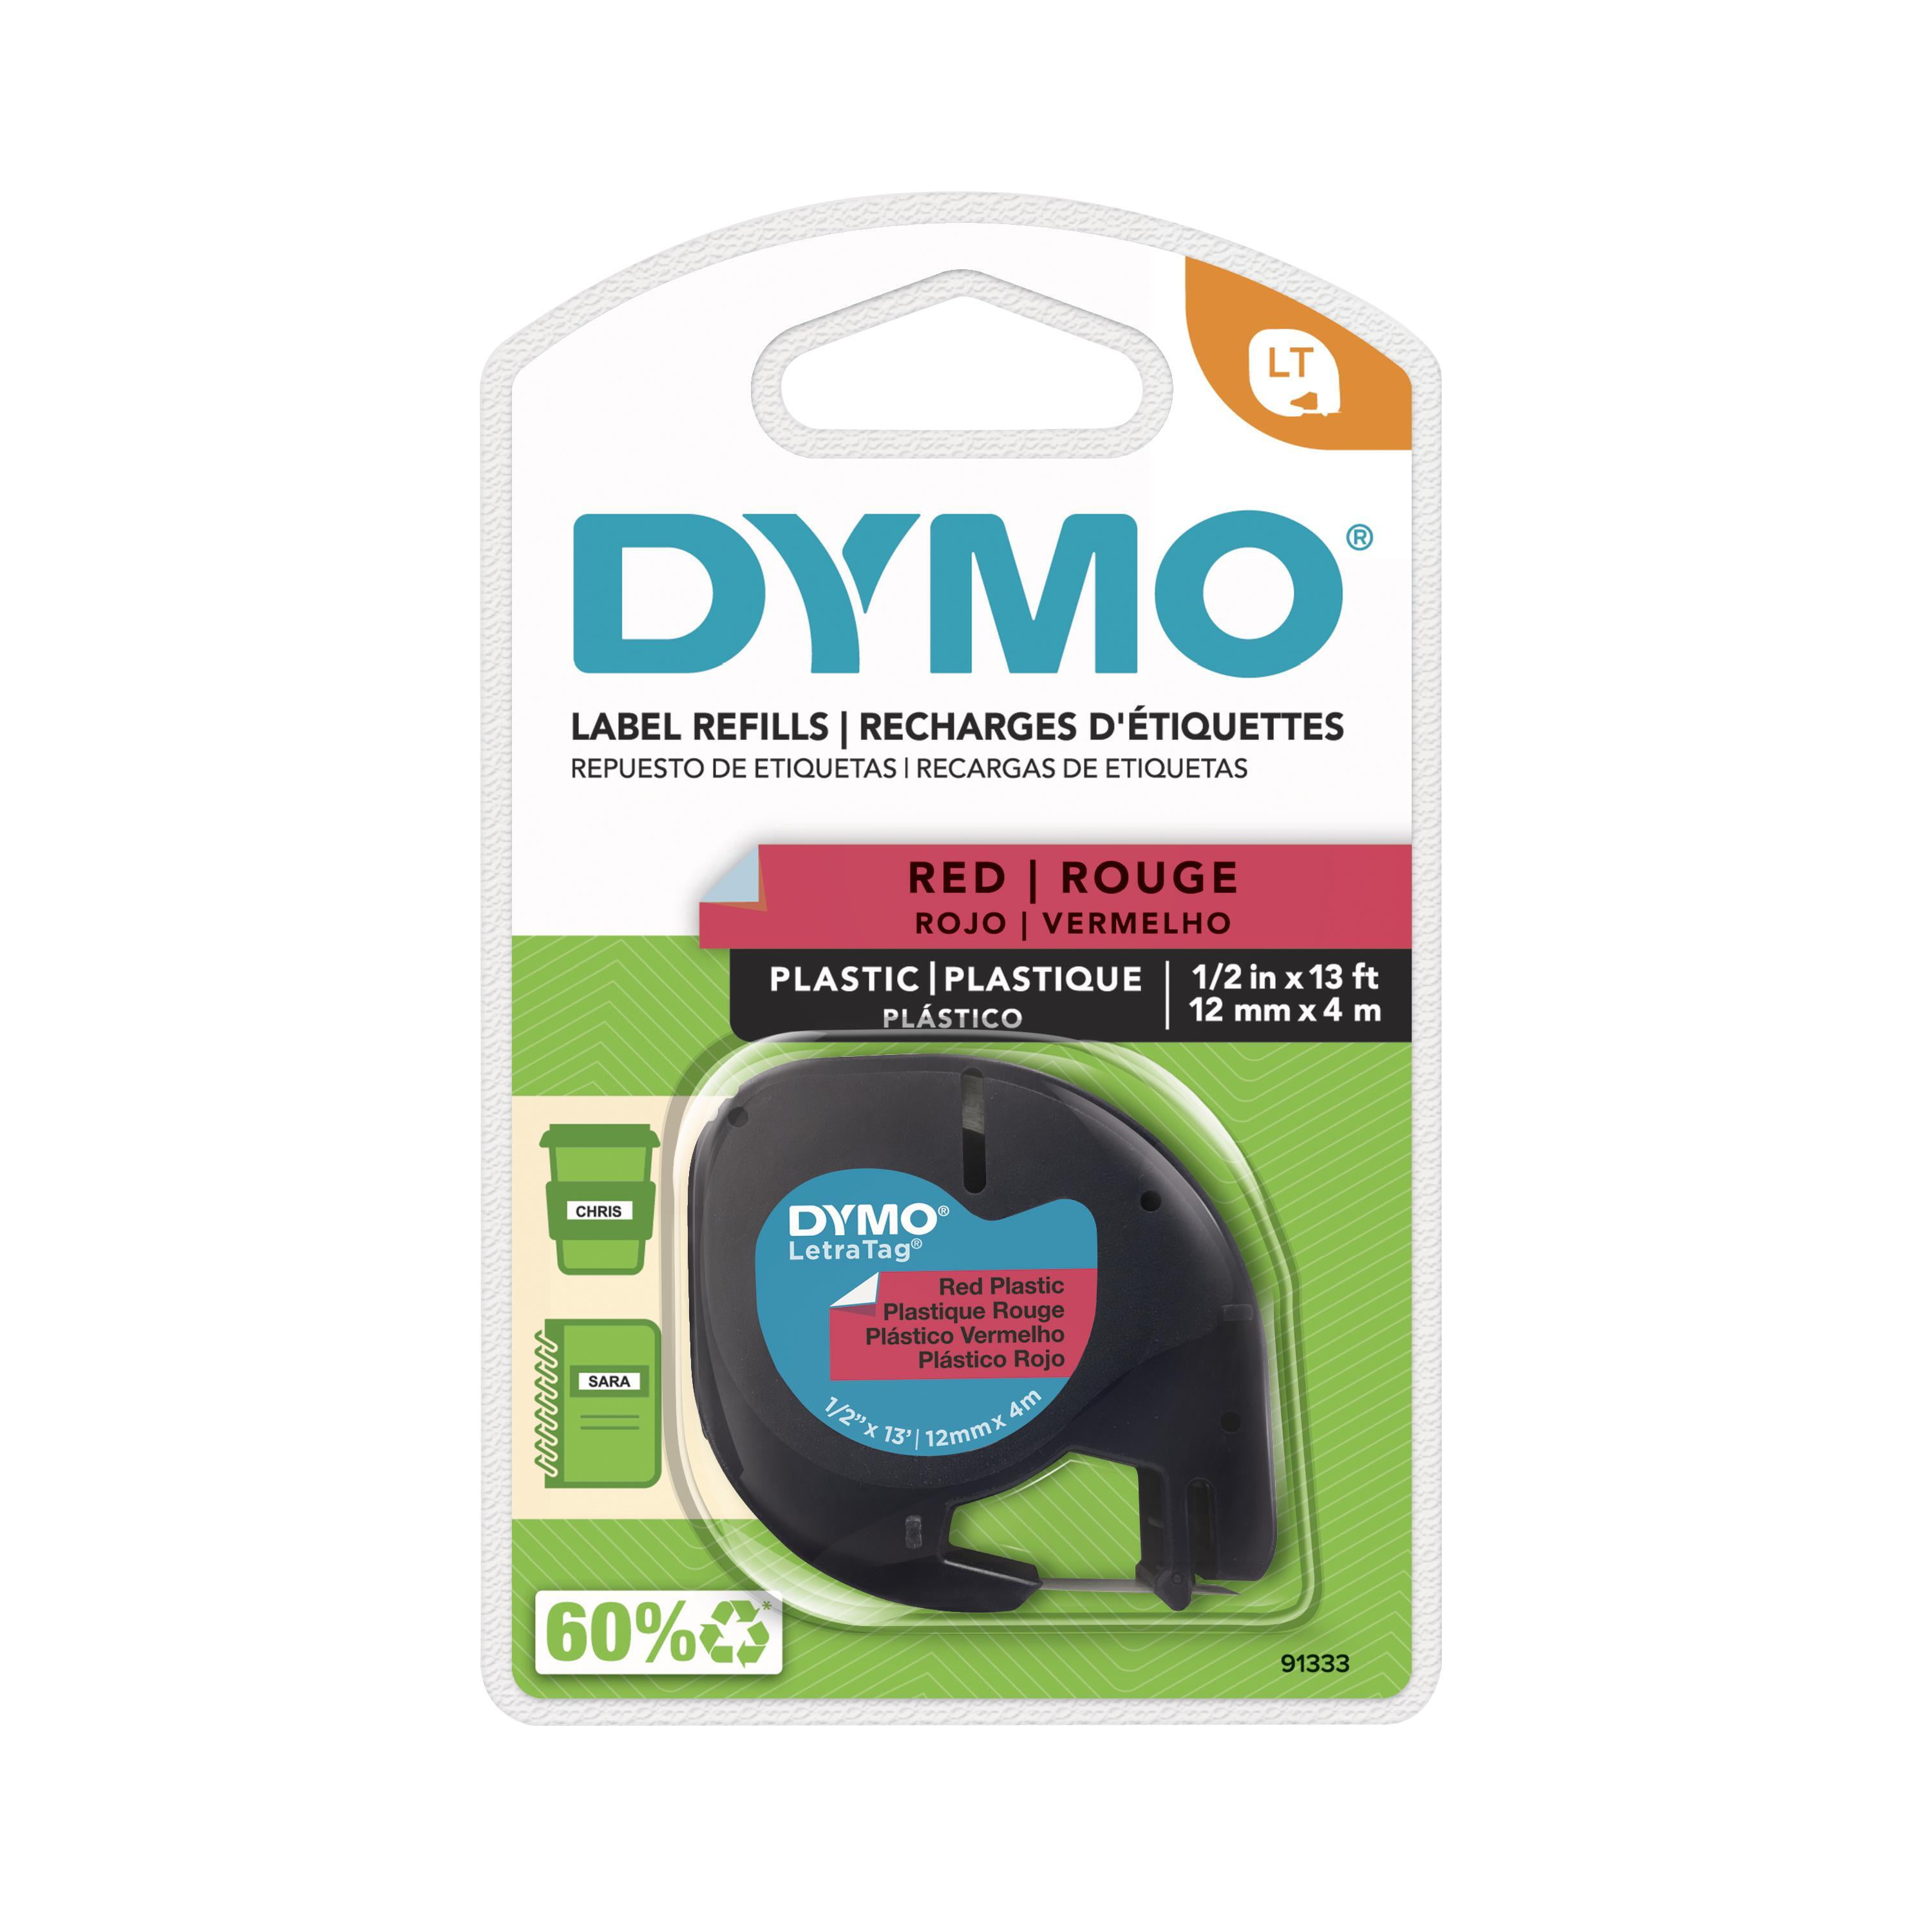 Dymo2 PK 18771 Iron on Fabric Labels Compatible with LT LetraTag Printers 12mm 